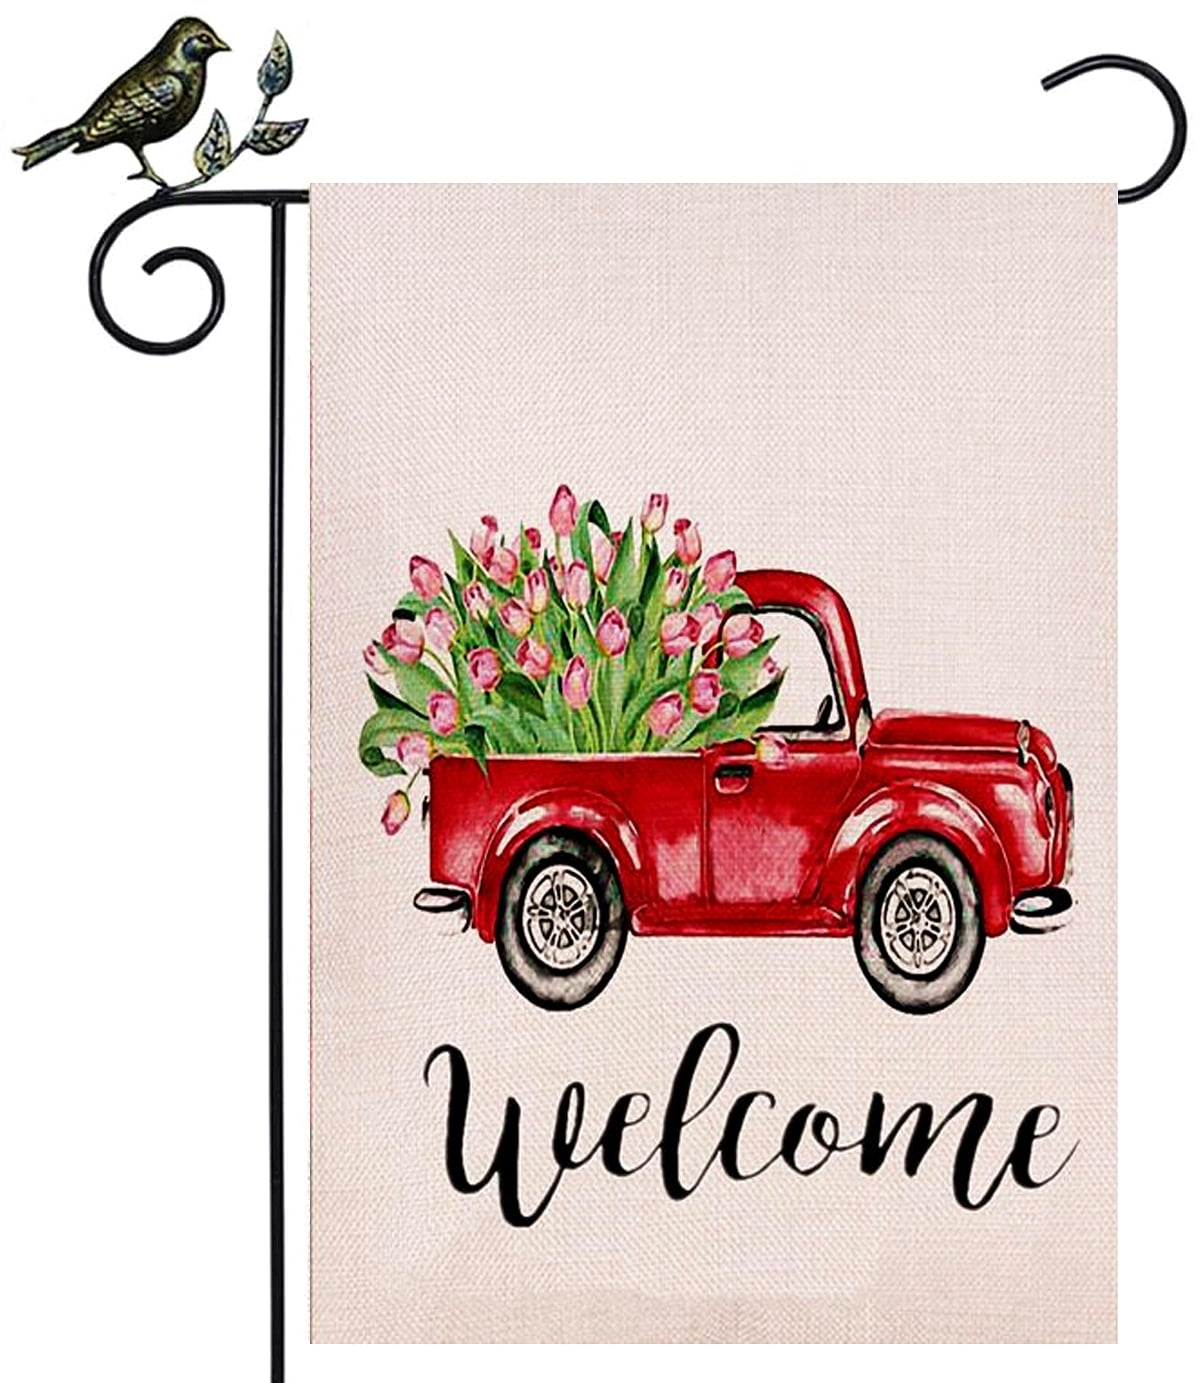 Welcome Valentine's Day love hope Garden Flag Double-sided House Decor Banner